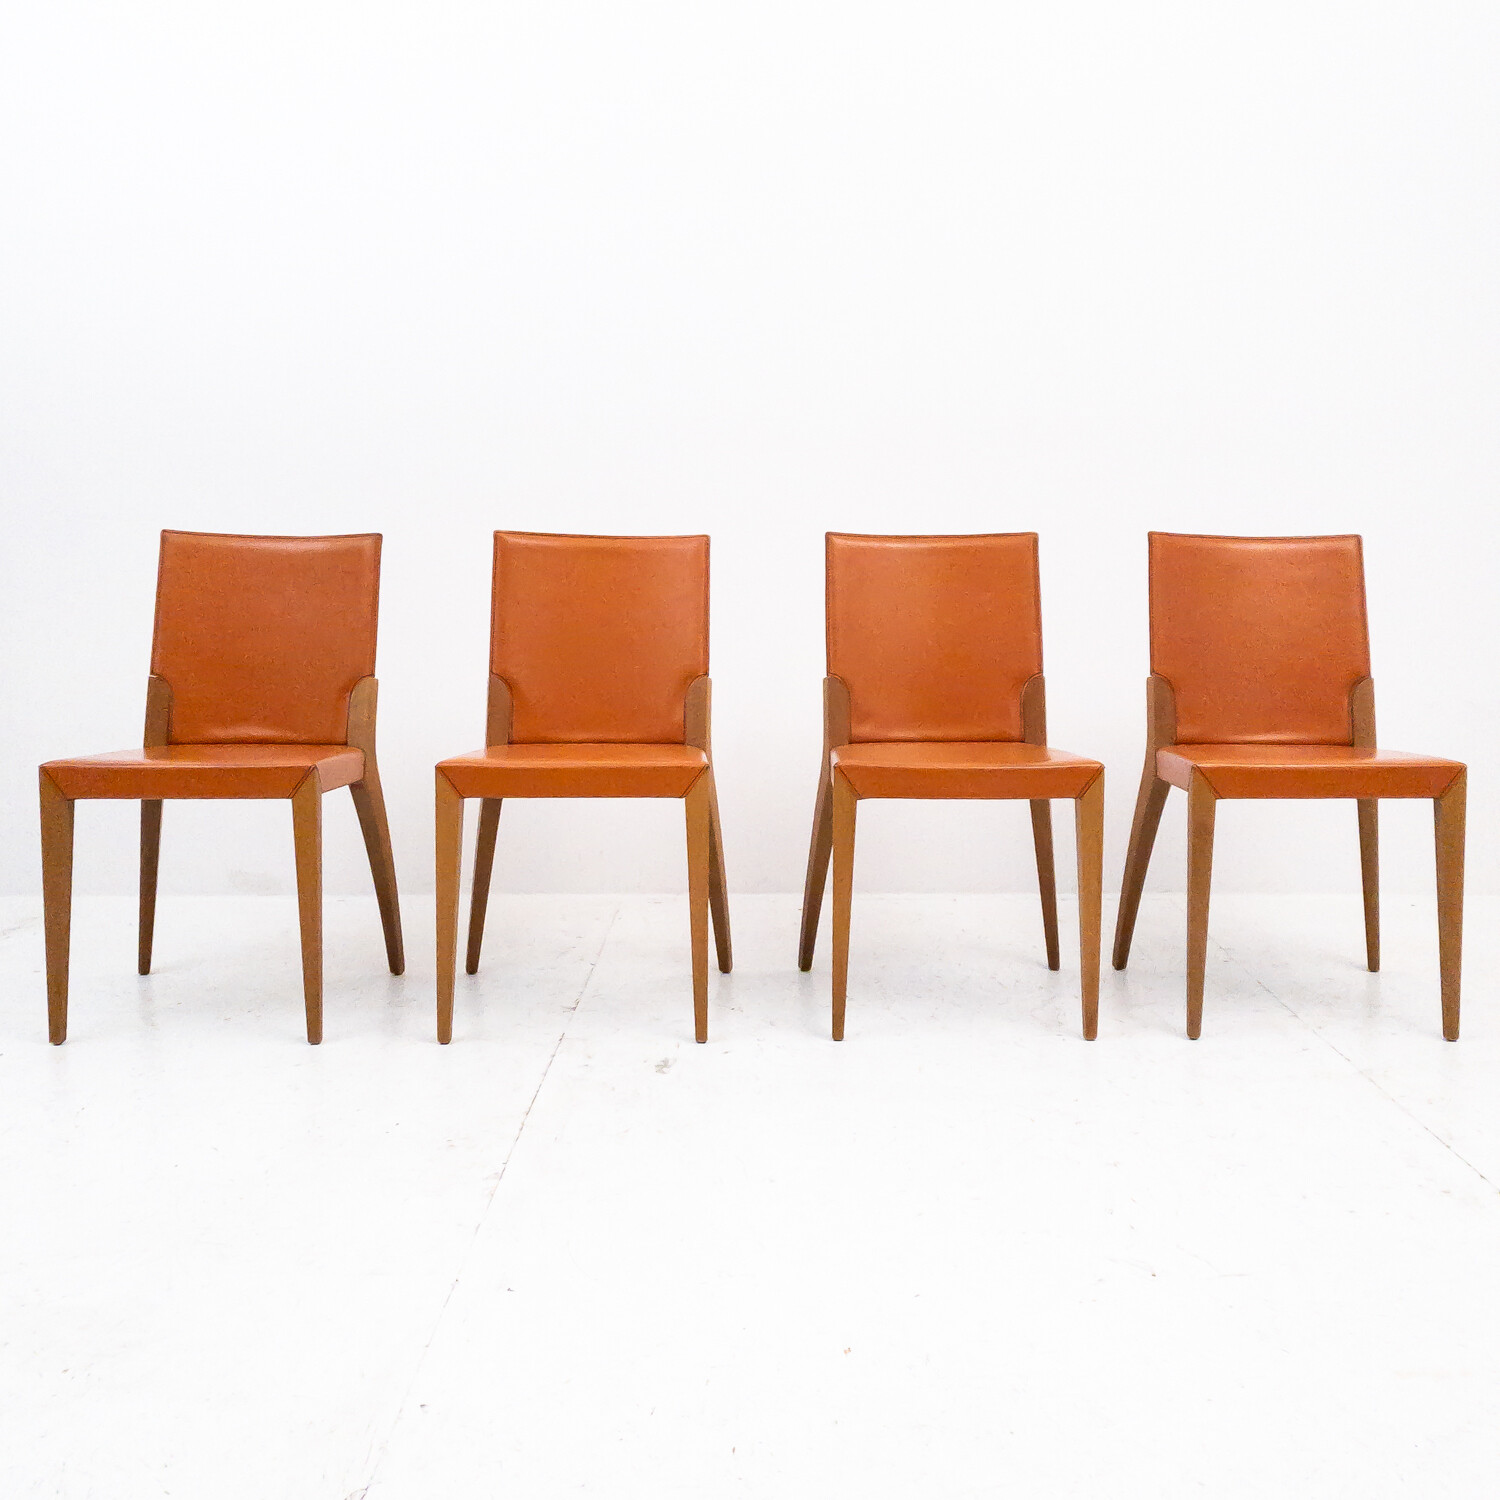 Set of 4 chairs Mod. Sharon by Cattelan